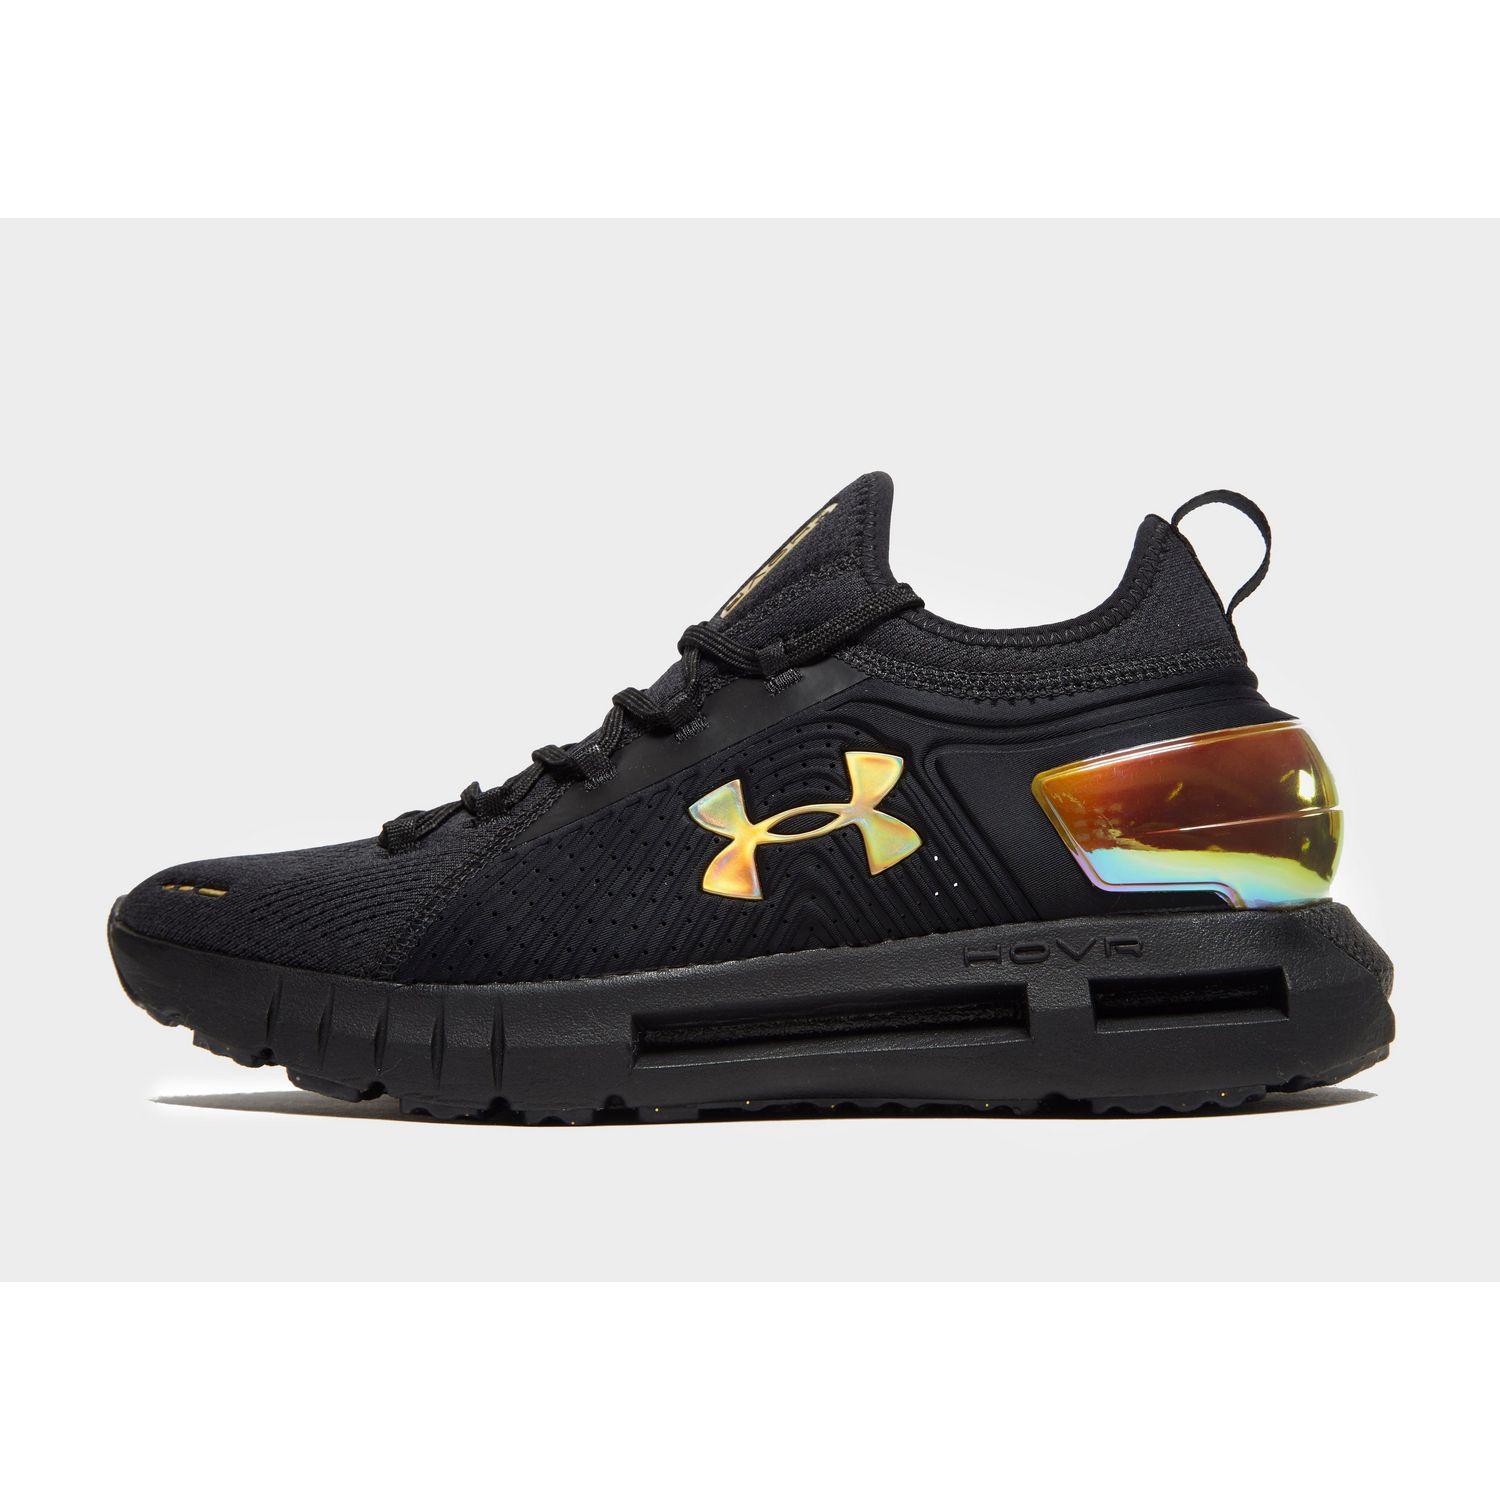 under armour hovr black gold